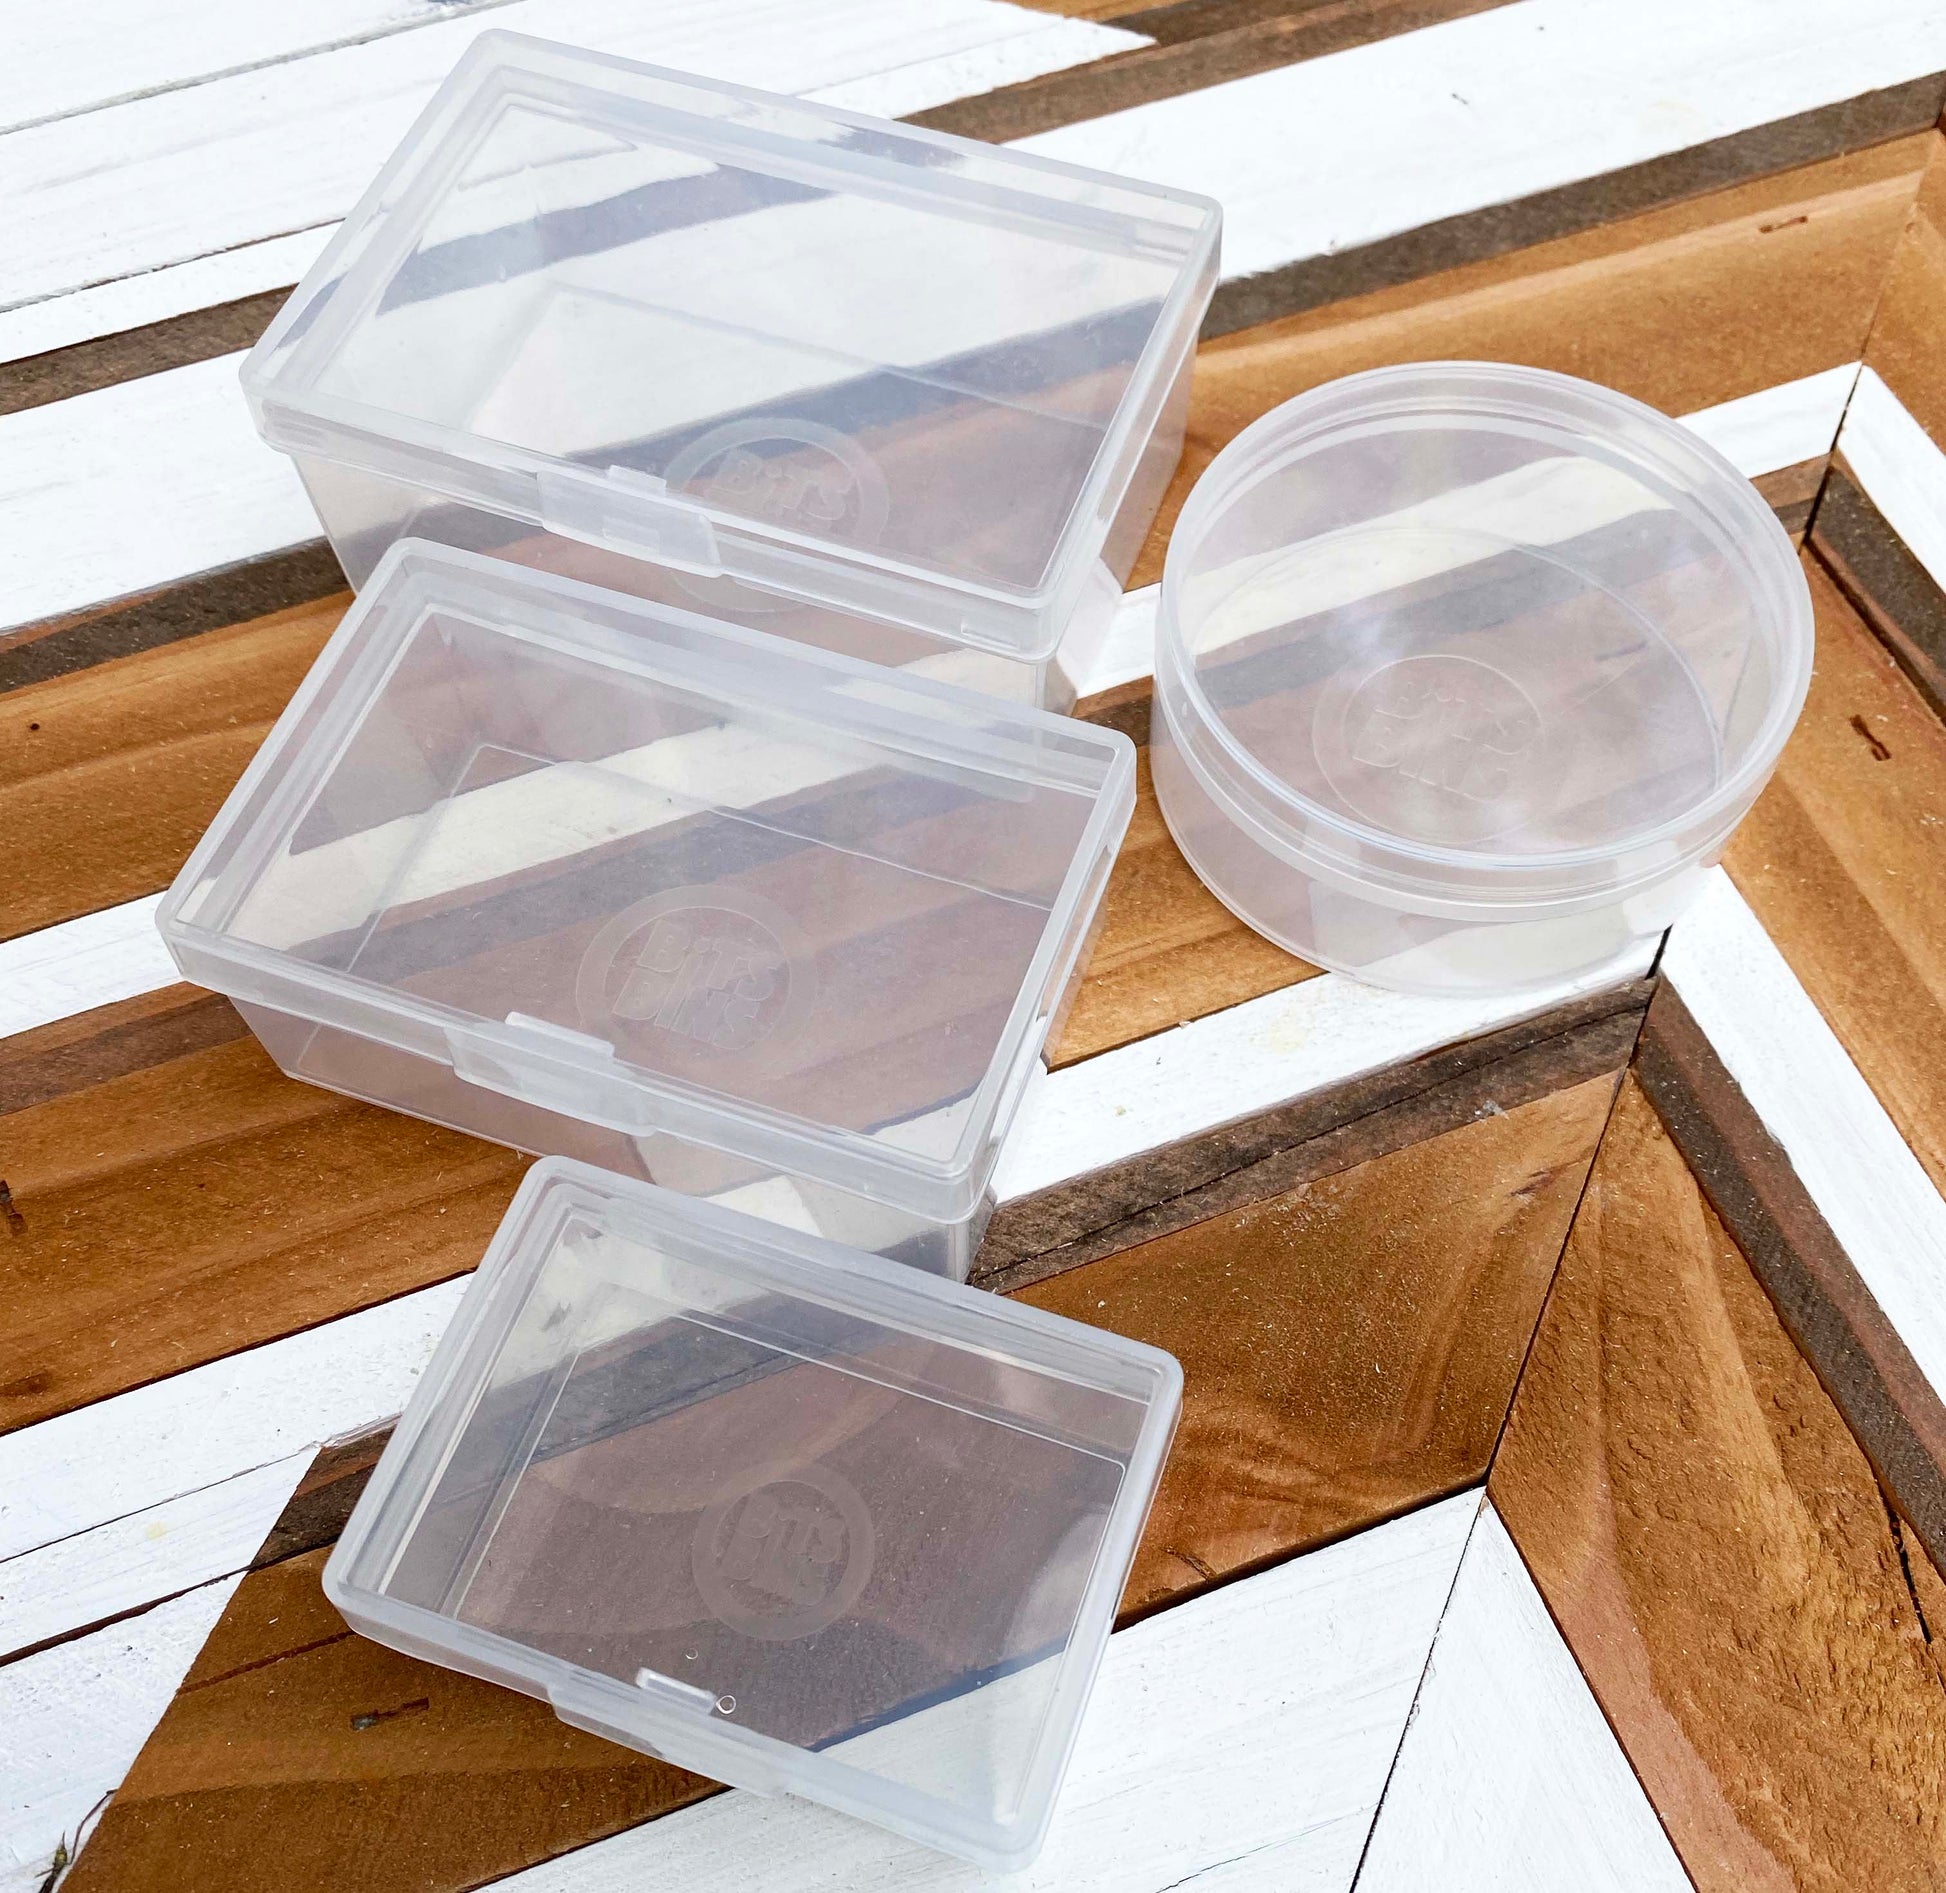 Bits Bins board game organizer organization board game components, storage for meeples, tokens 